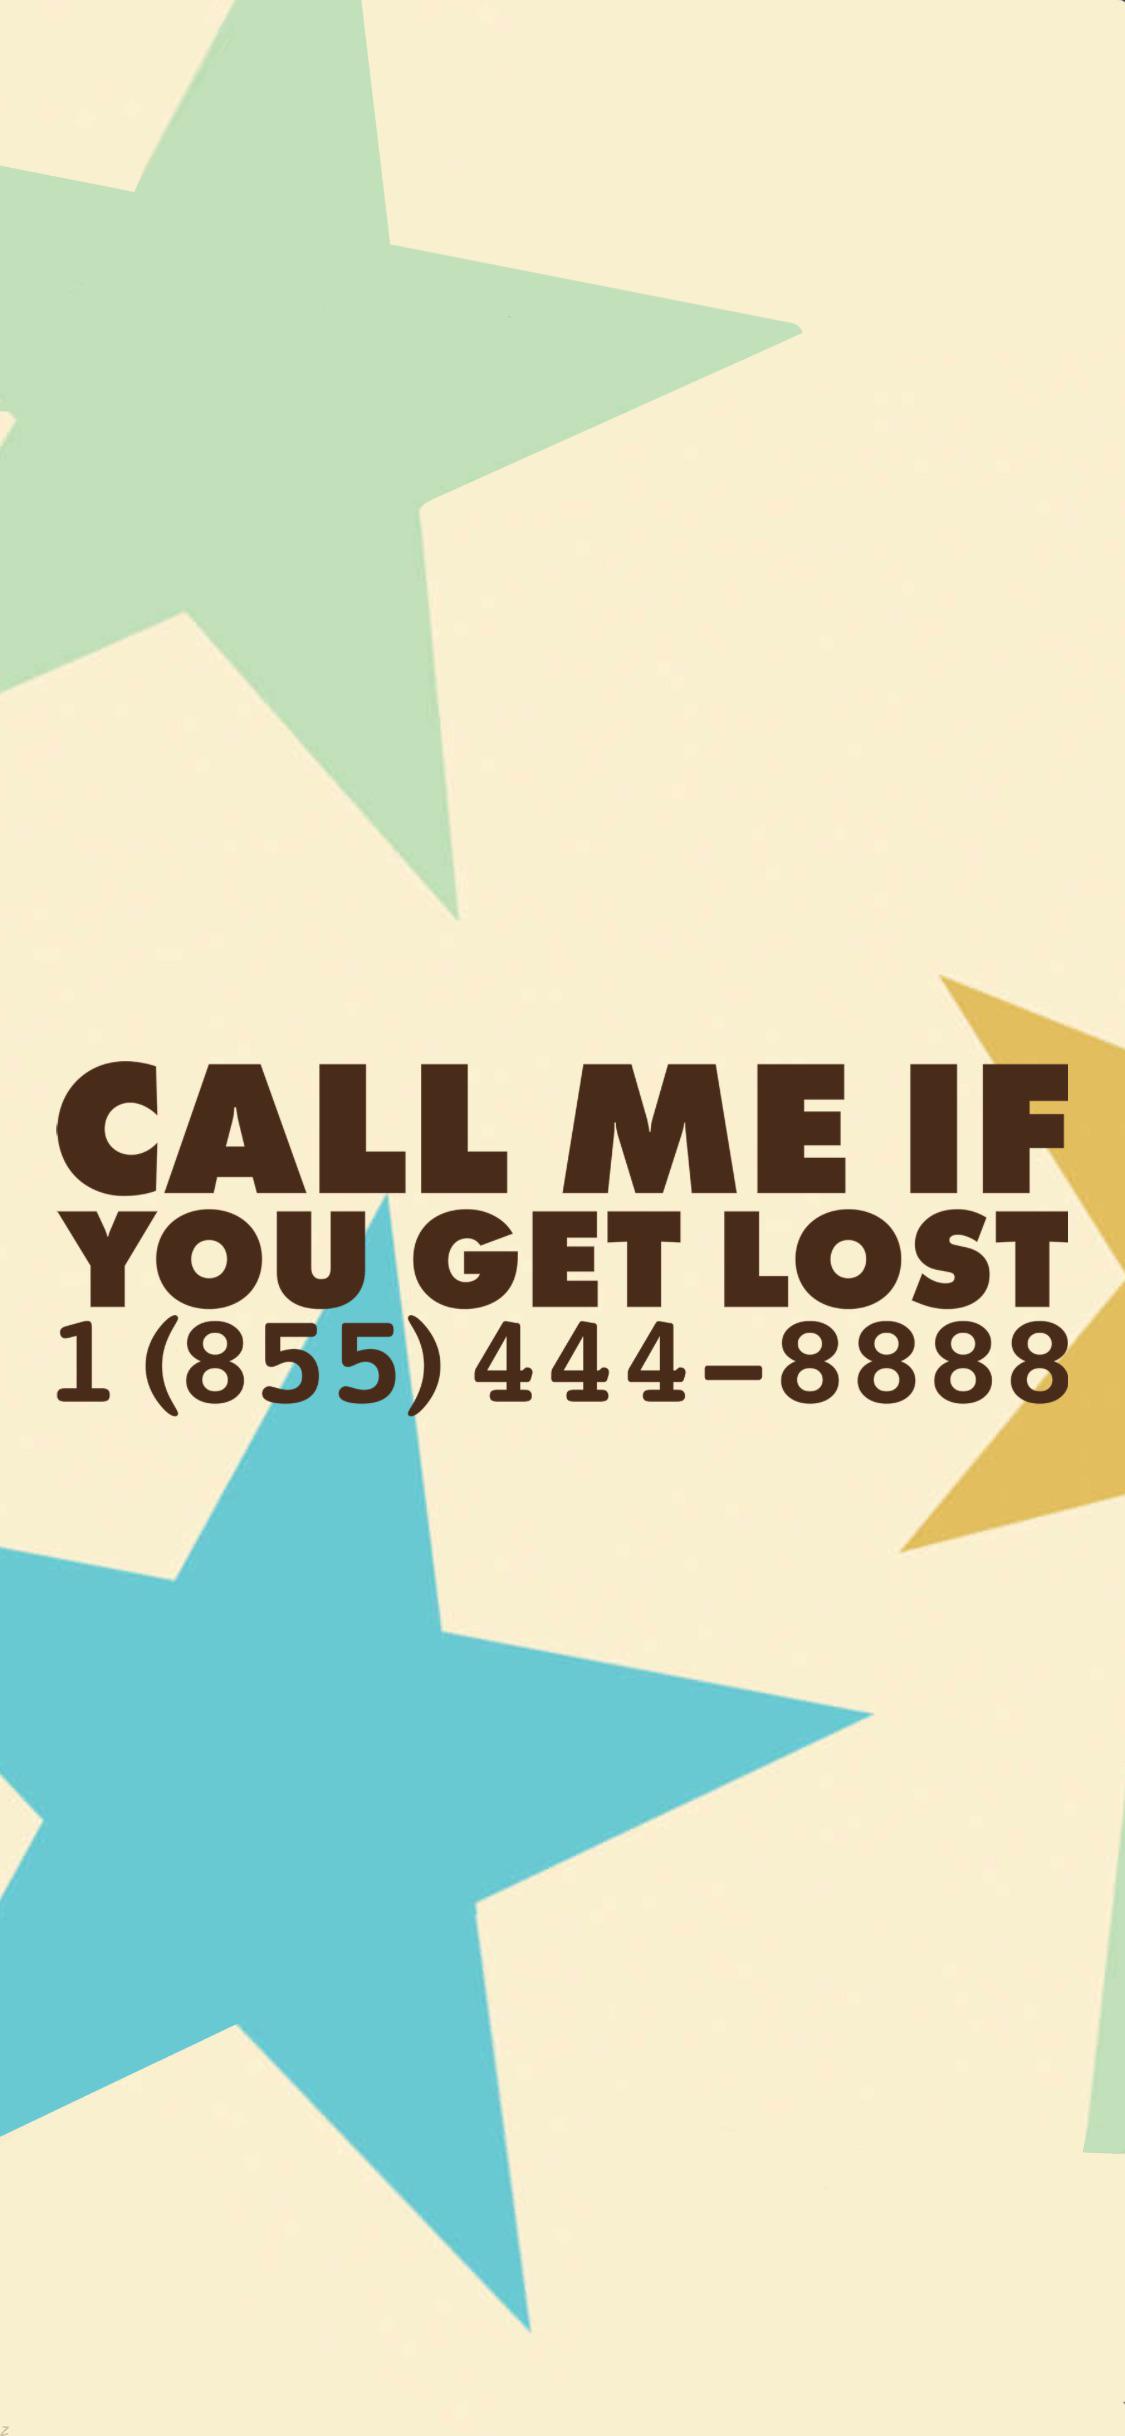 Call me if you get lost